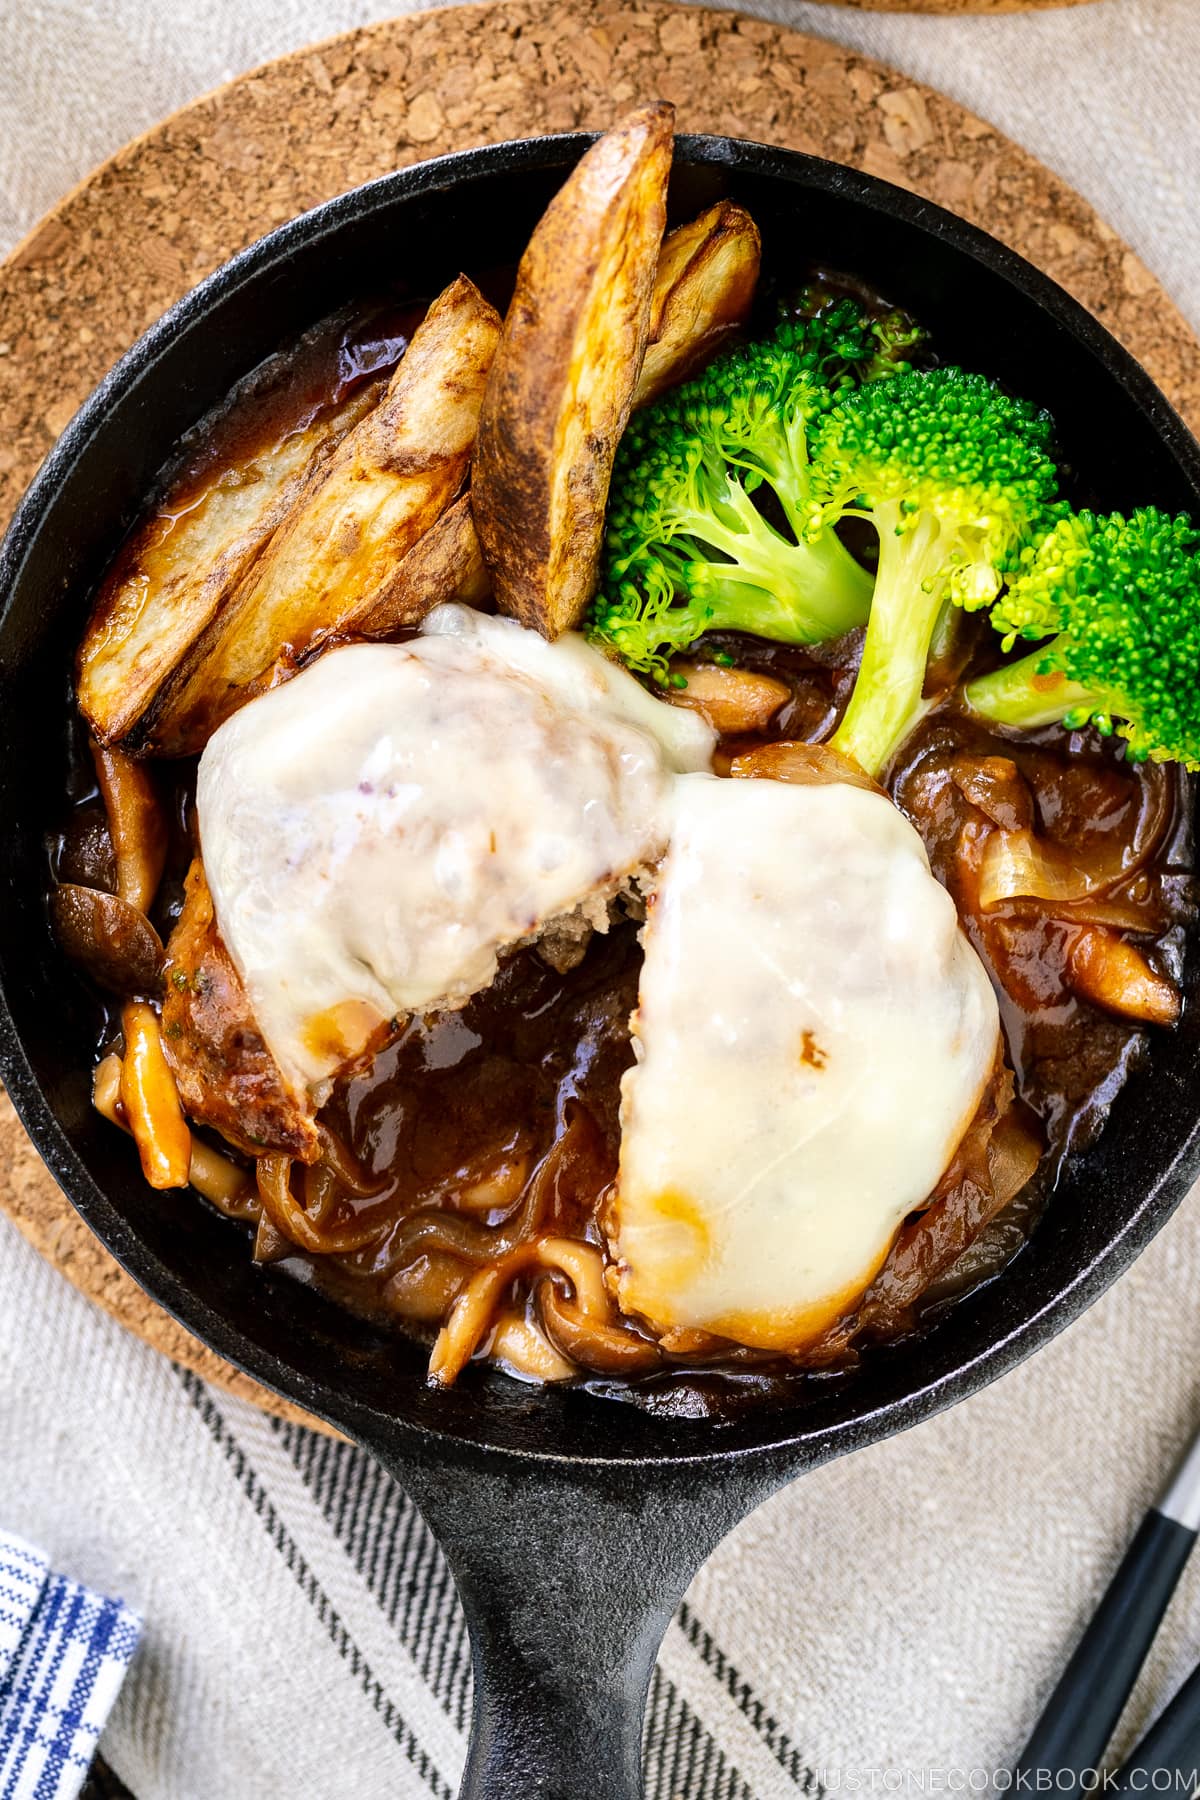 A mini cast iron skillet containing Japanese stewed hamburger steak with melted cheese on top.